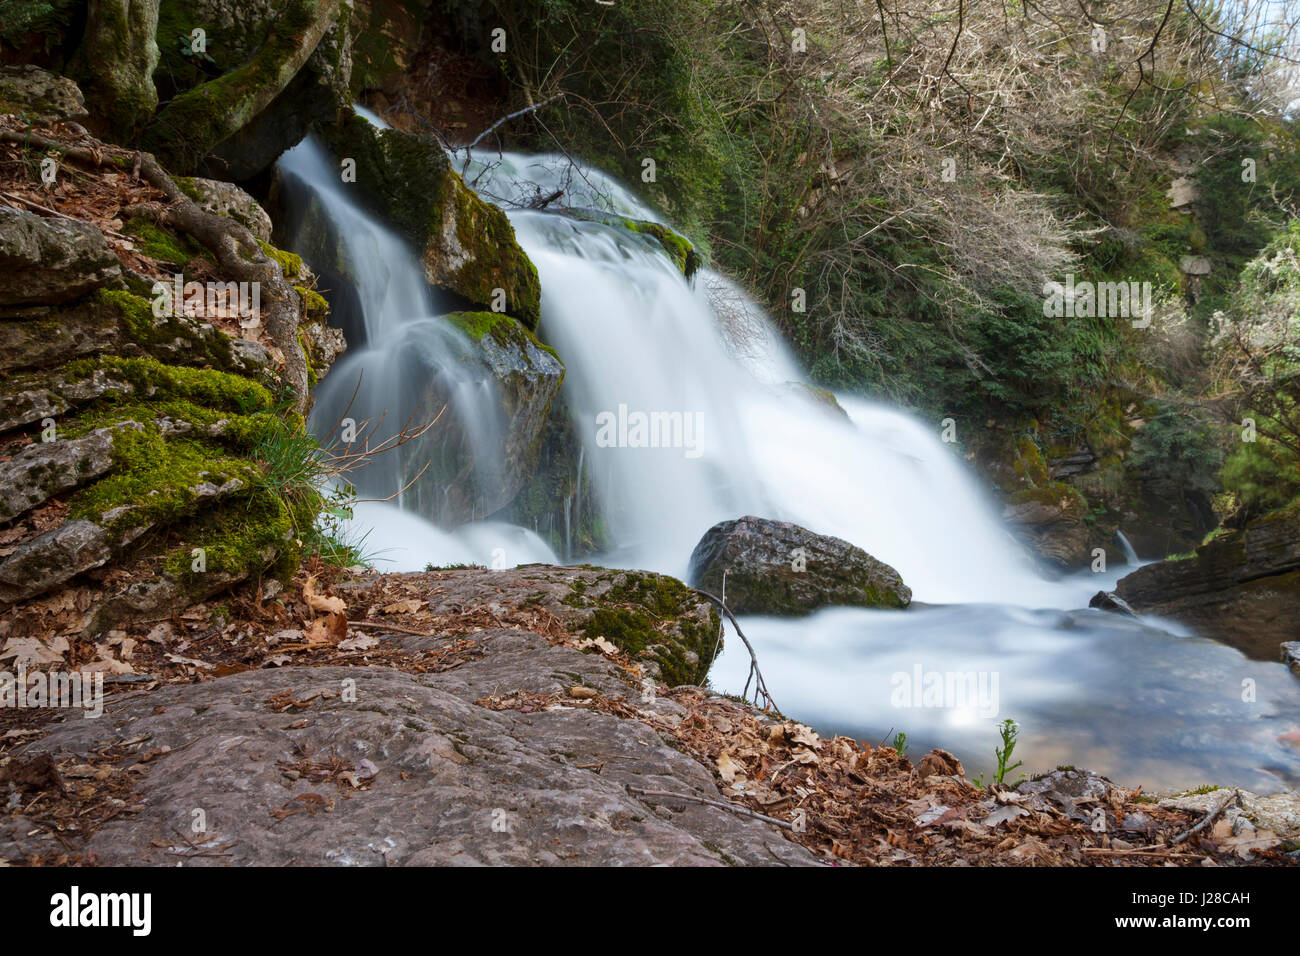 Waterfall in a river source, water flowing with power Stock Photo